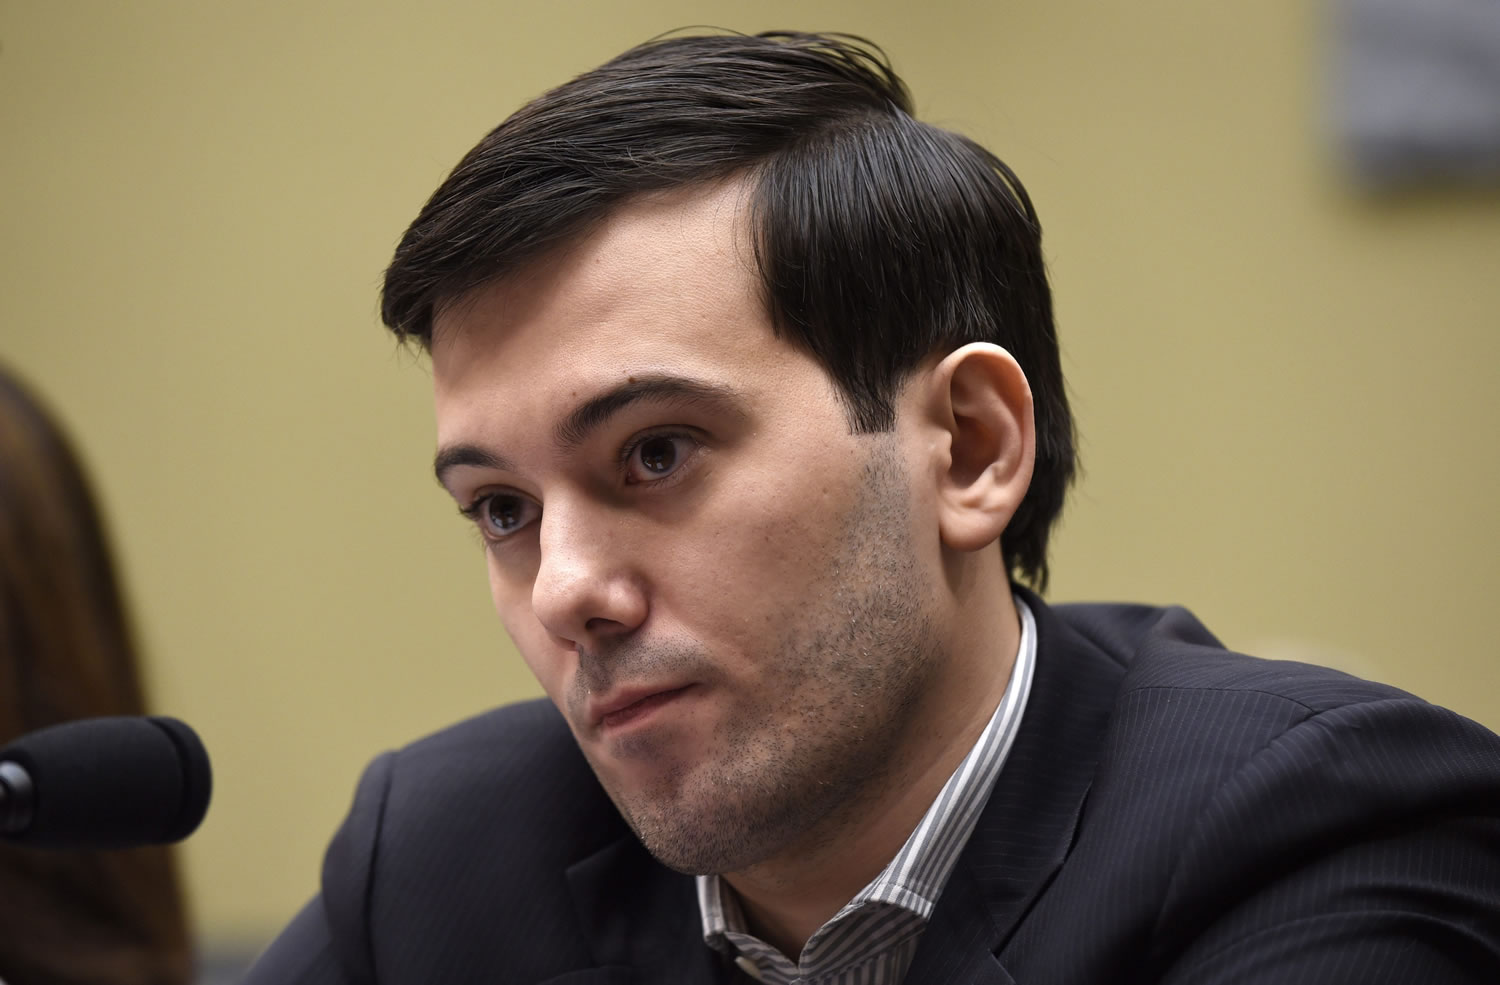 Pharmaceutical chief Martin Shkreli waits on Capitol Hill in Washington, Thursday, Feb. 4, 2016, for the start of the House Committee on Oversight and Reform Committee hearing on his former company&#039;s decision to raise the price of a lifesaving medicine. Shkreli refused to testify Thursday in an appearance before U.S. lawmakers who excoriated him over severe hikes for a drug sold by a company that he acquired.